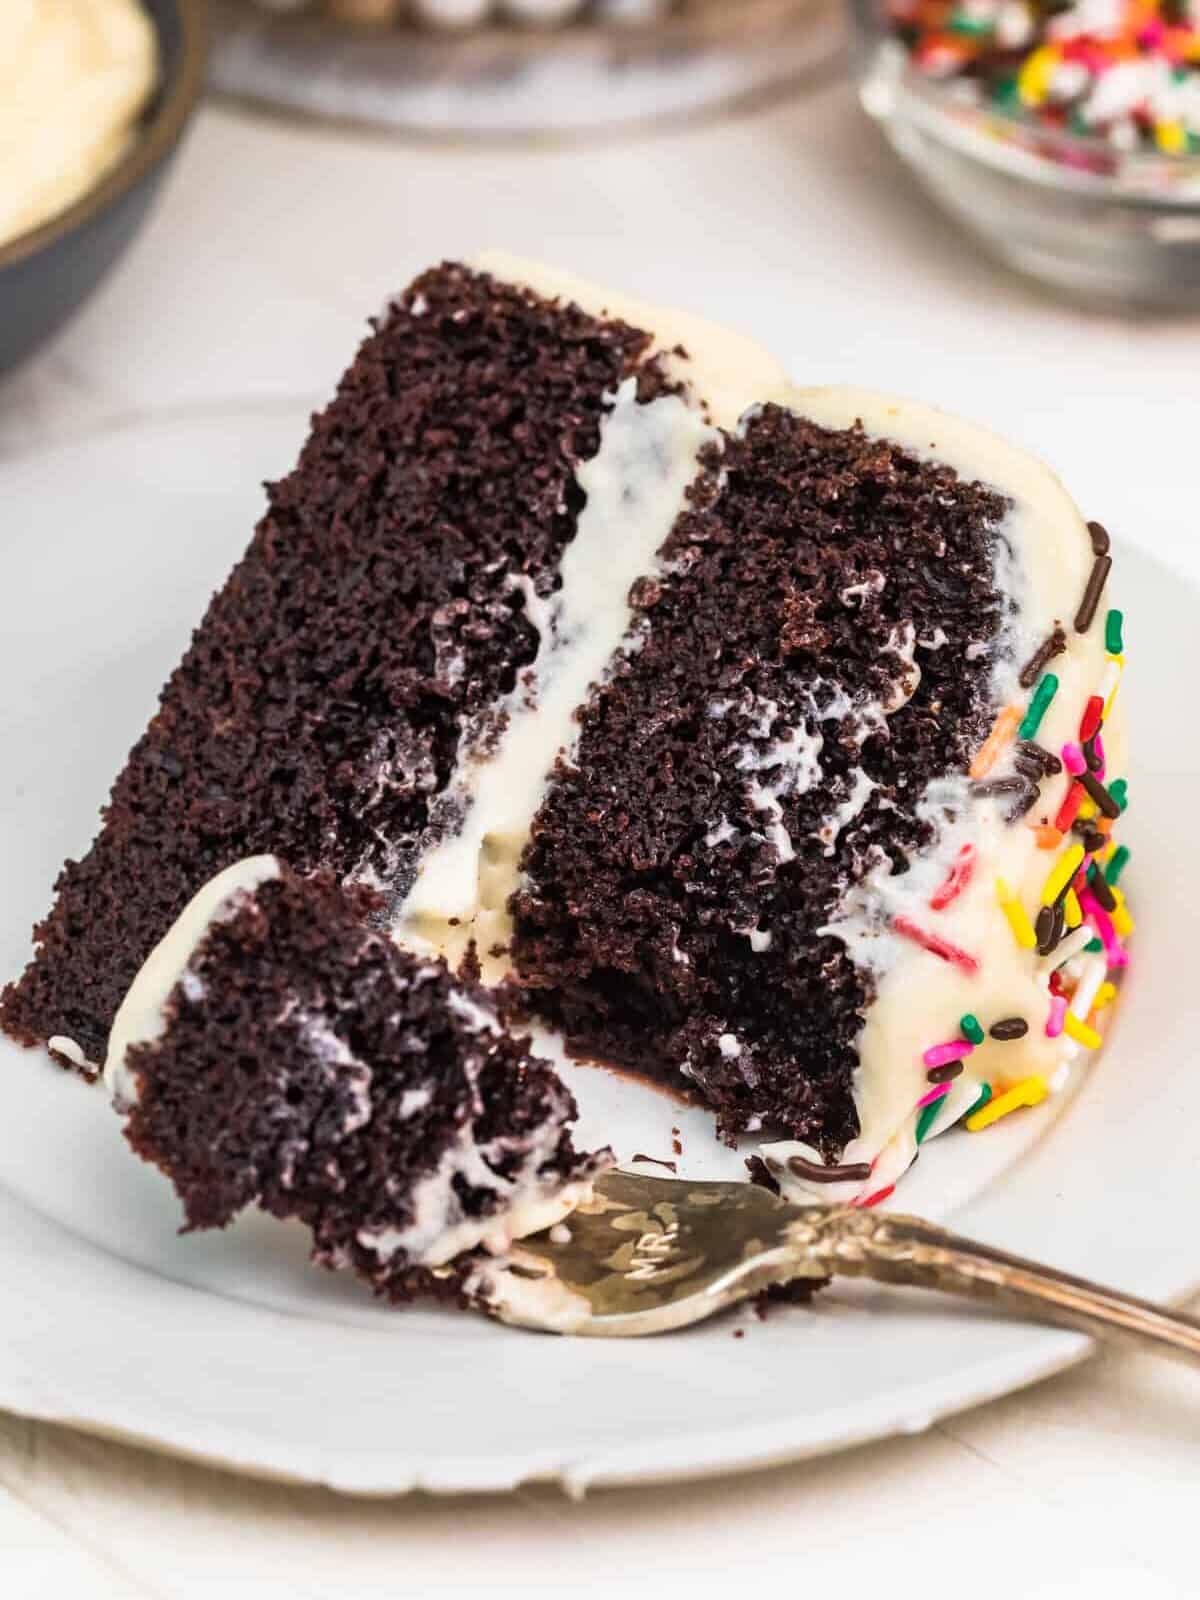 A piece of chocolate cake on a plate, with Icing and fork